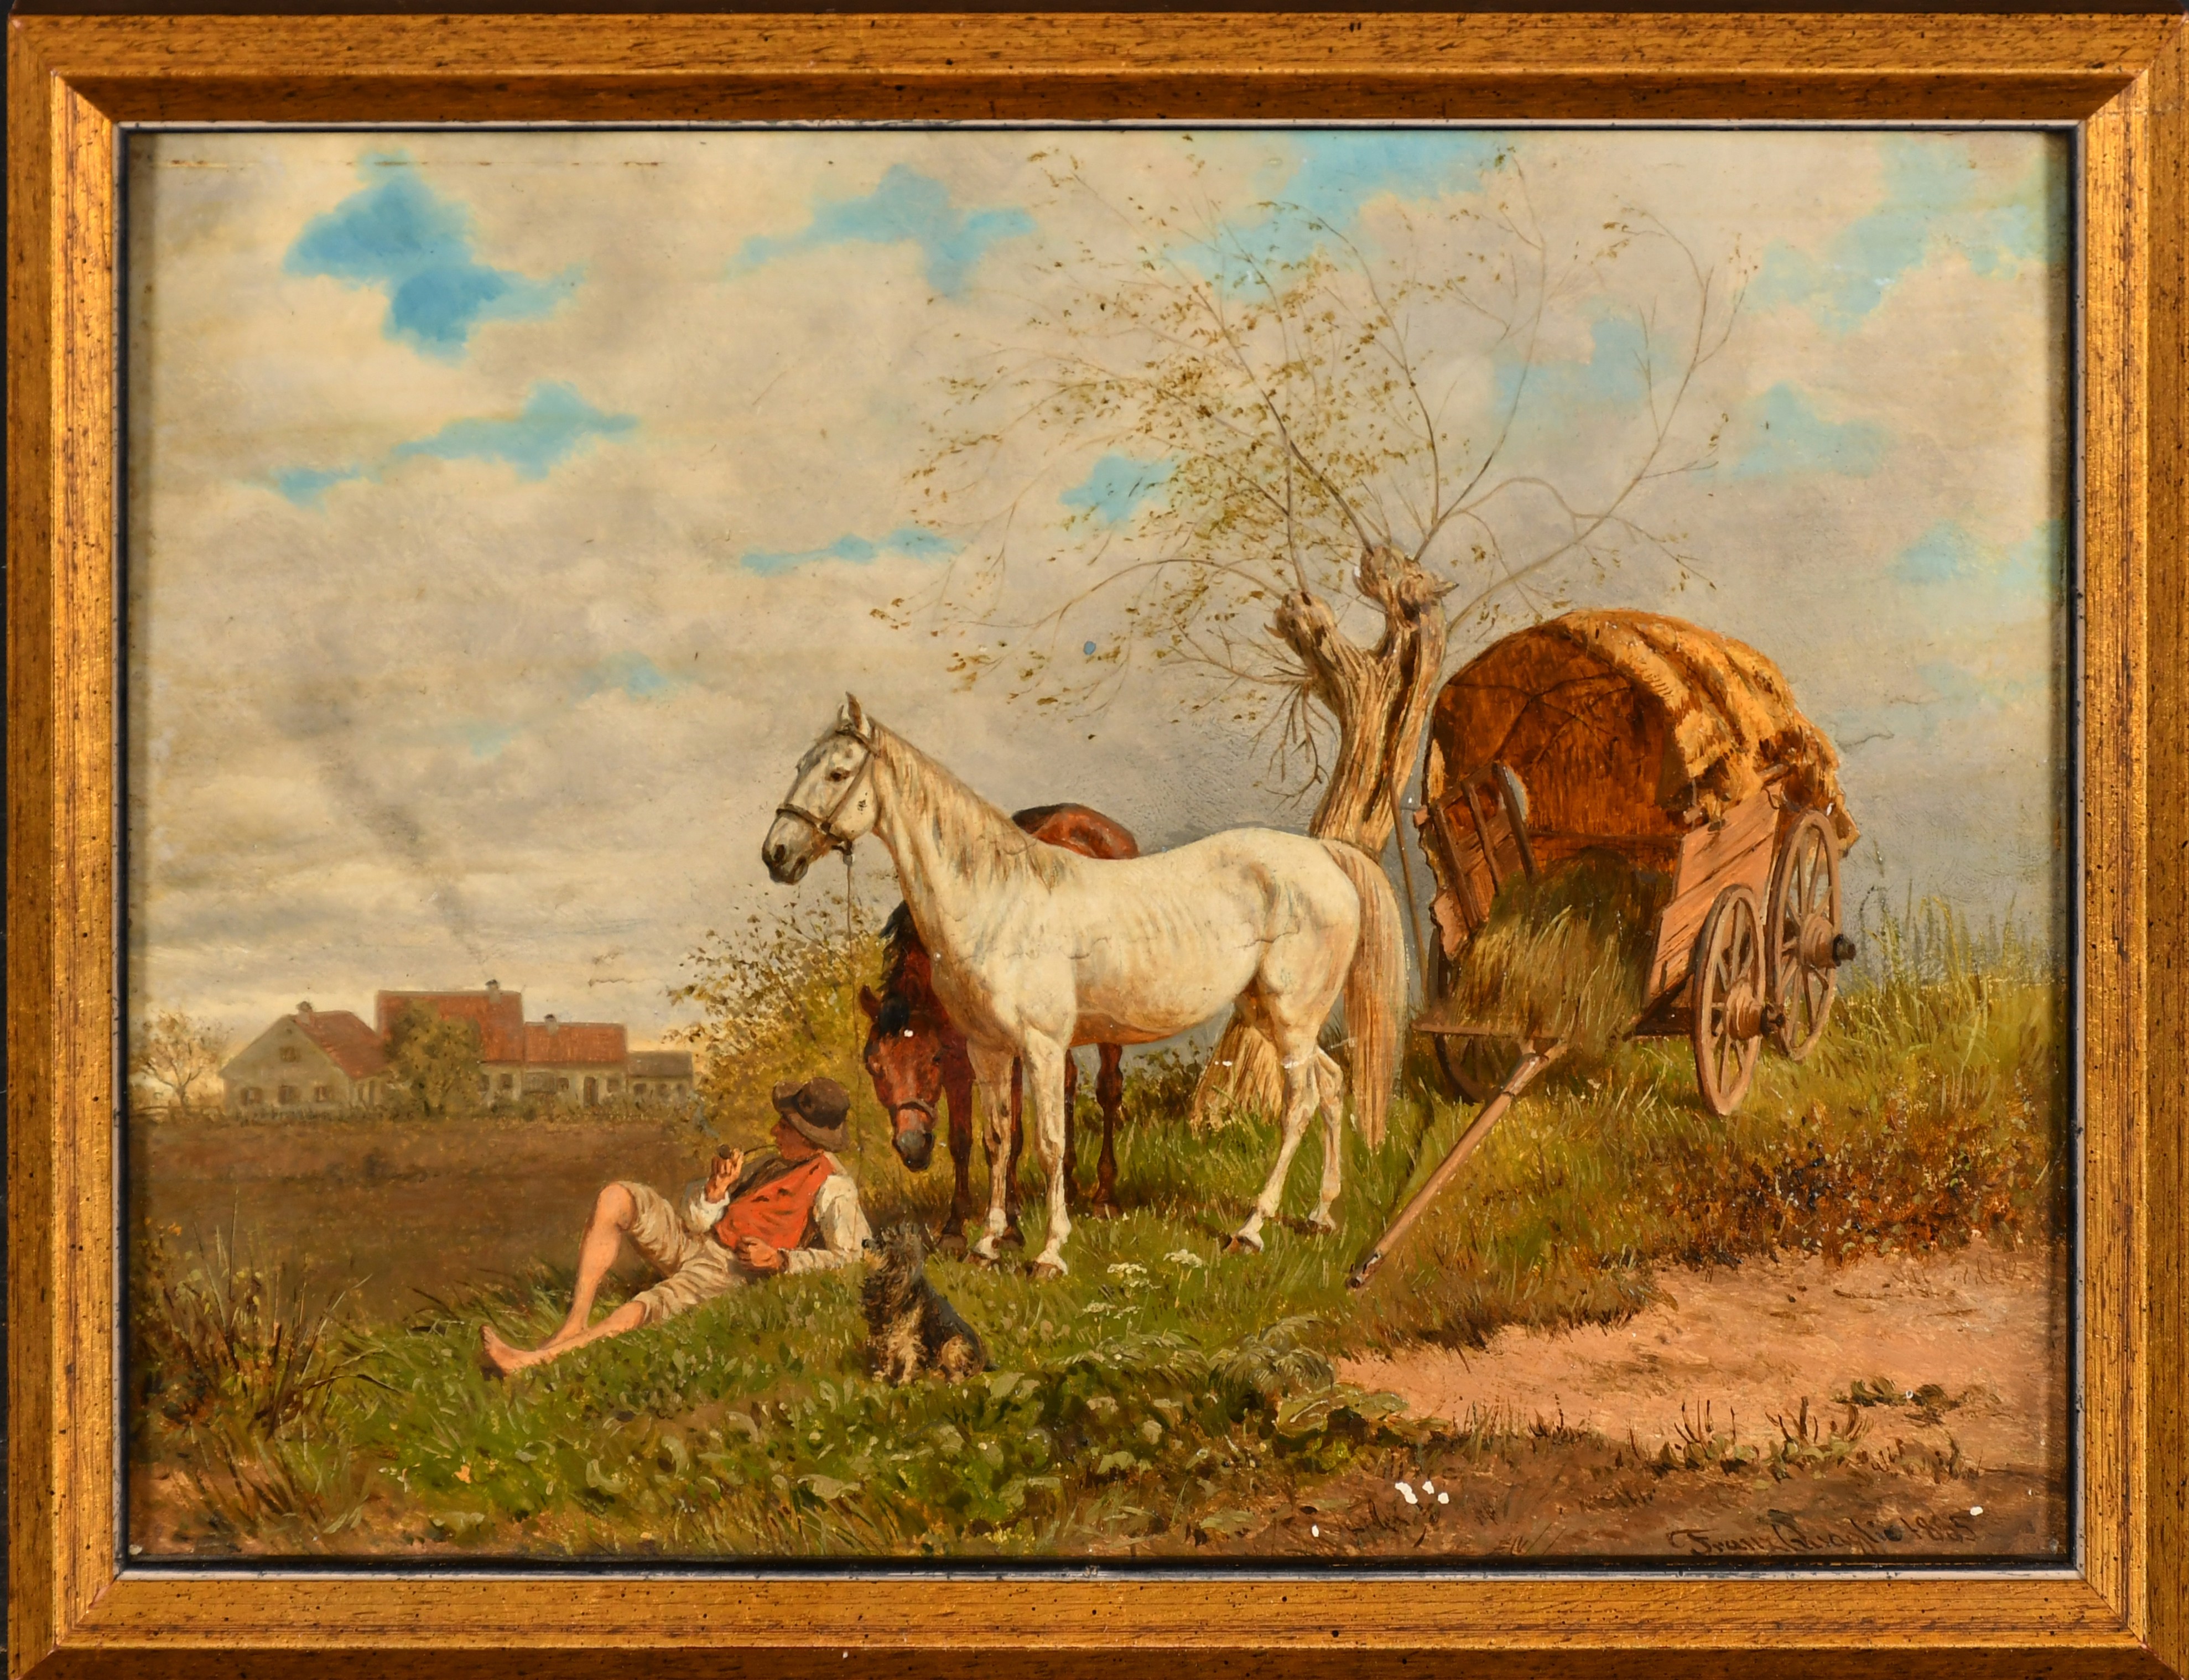 Franz Quaglio (1844-1920) German. The Resting Place, Oil on panel, Signed and dated 1885, 7" x 9.5" - Image 2 of 4